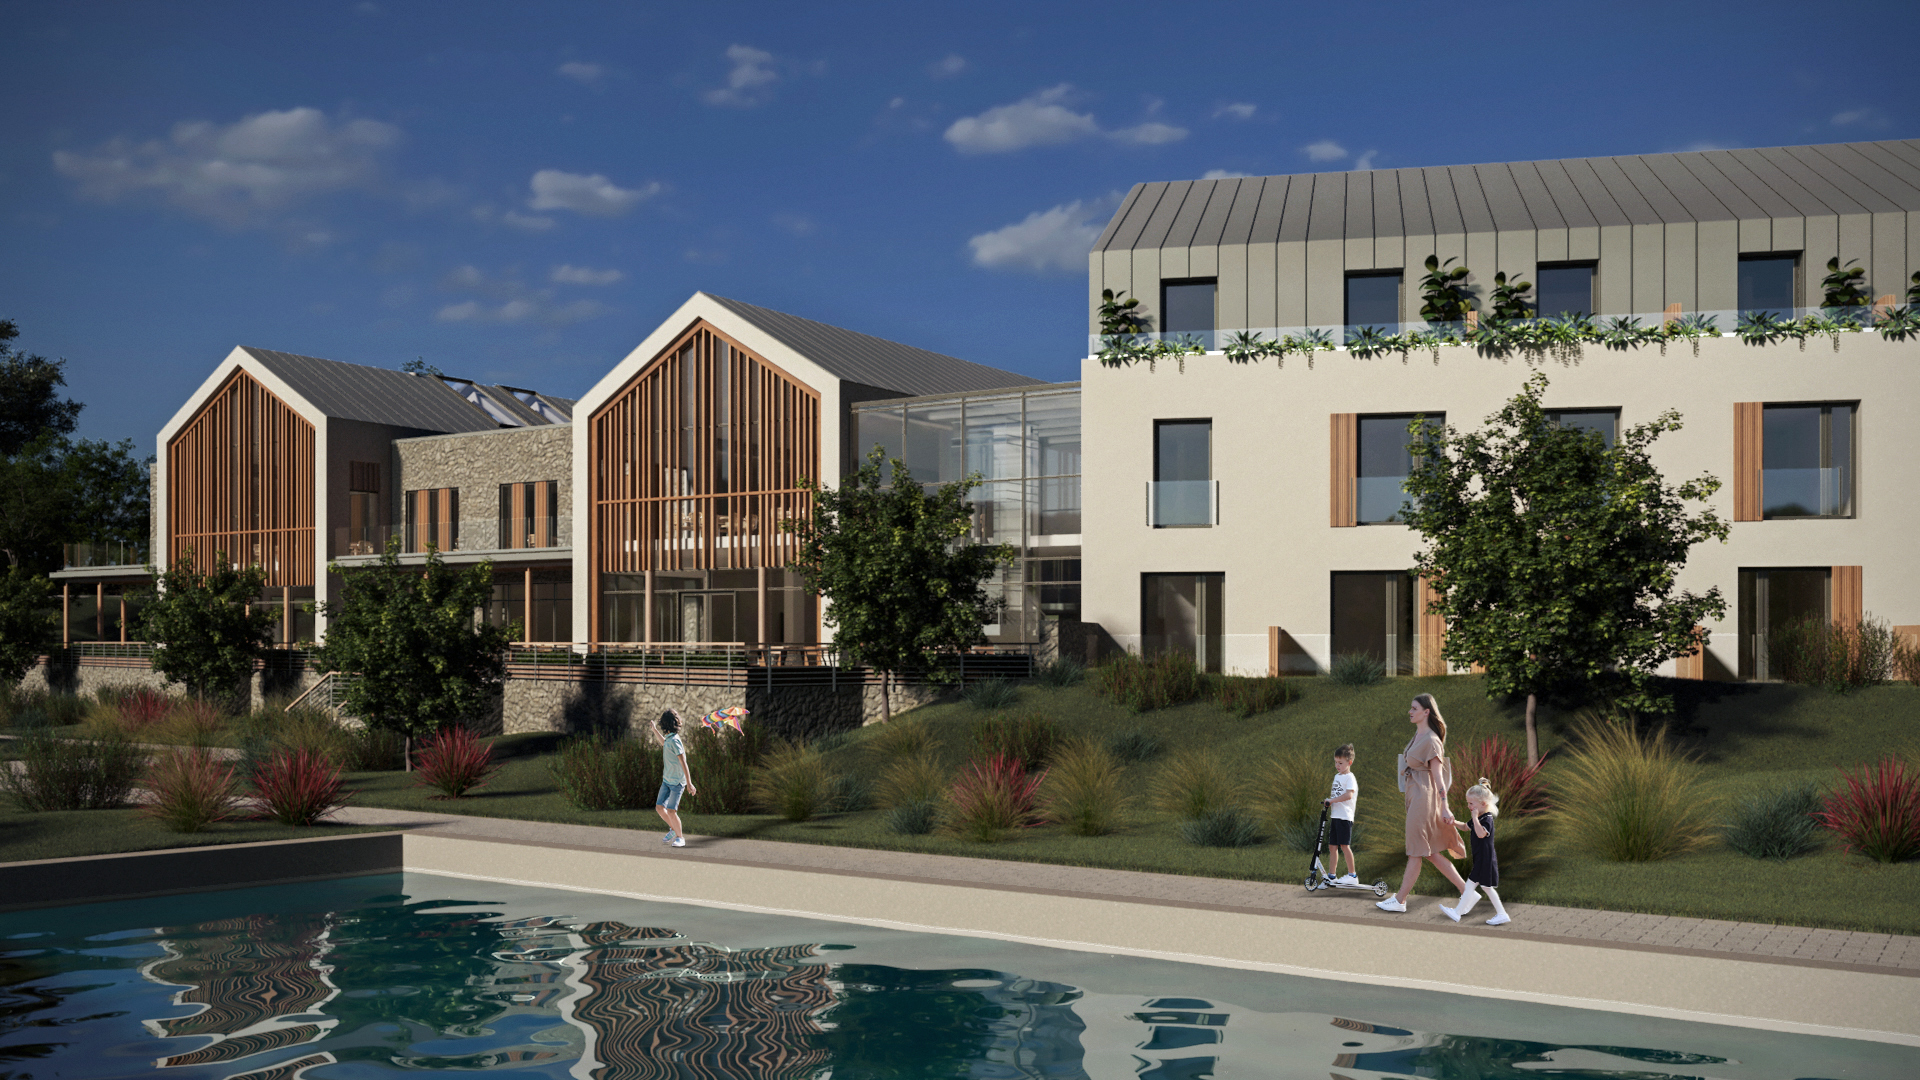 External CGI images of the Carrybridge Hotel and Marina provided by Whittaker and Watt Architects.